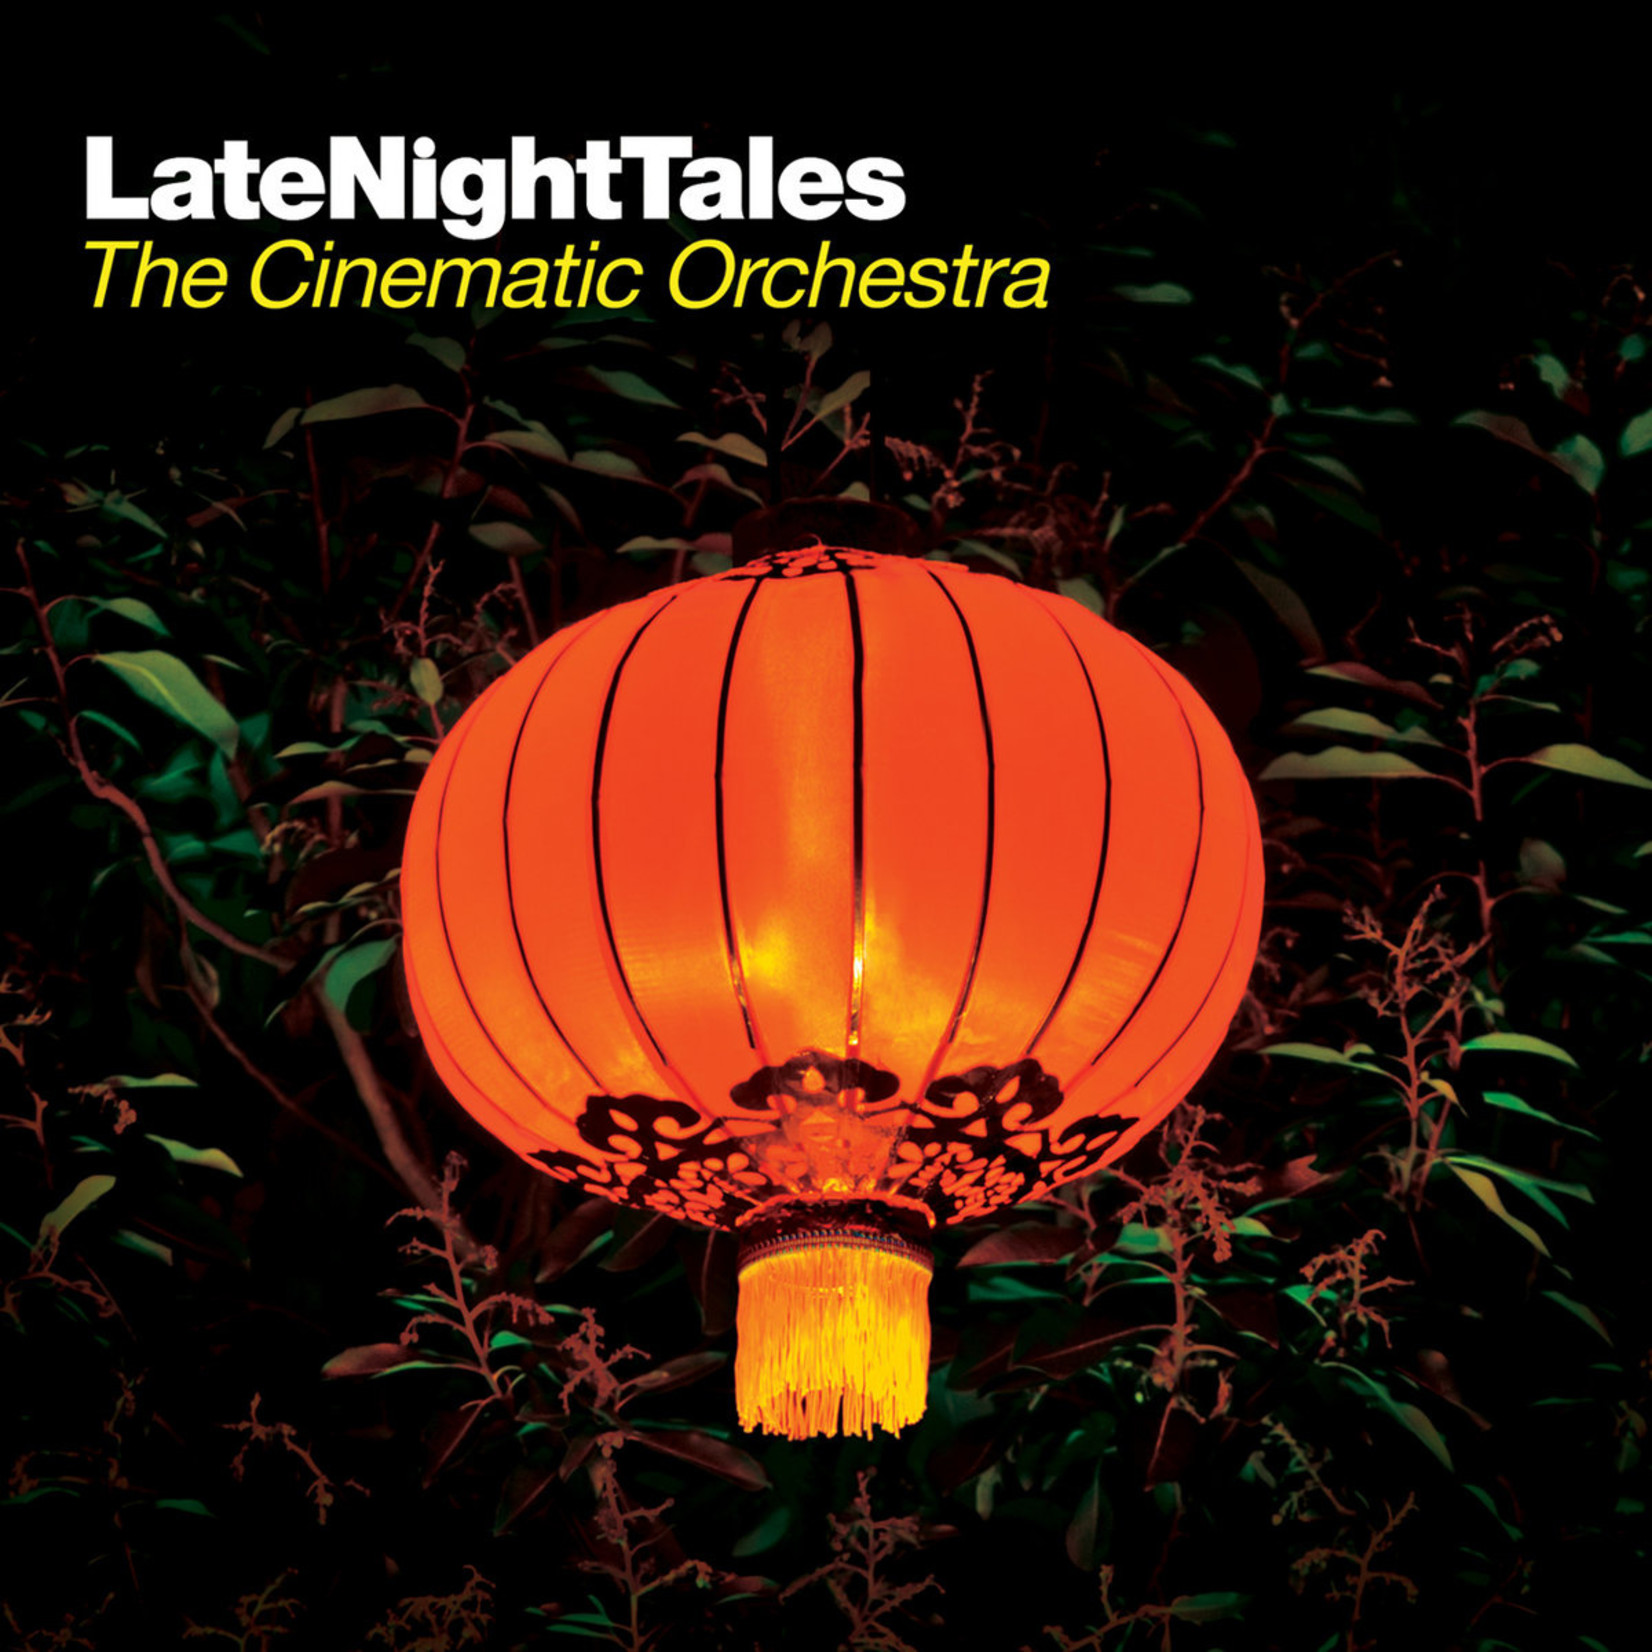 The Cinematic Orchestra – LateNightTales